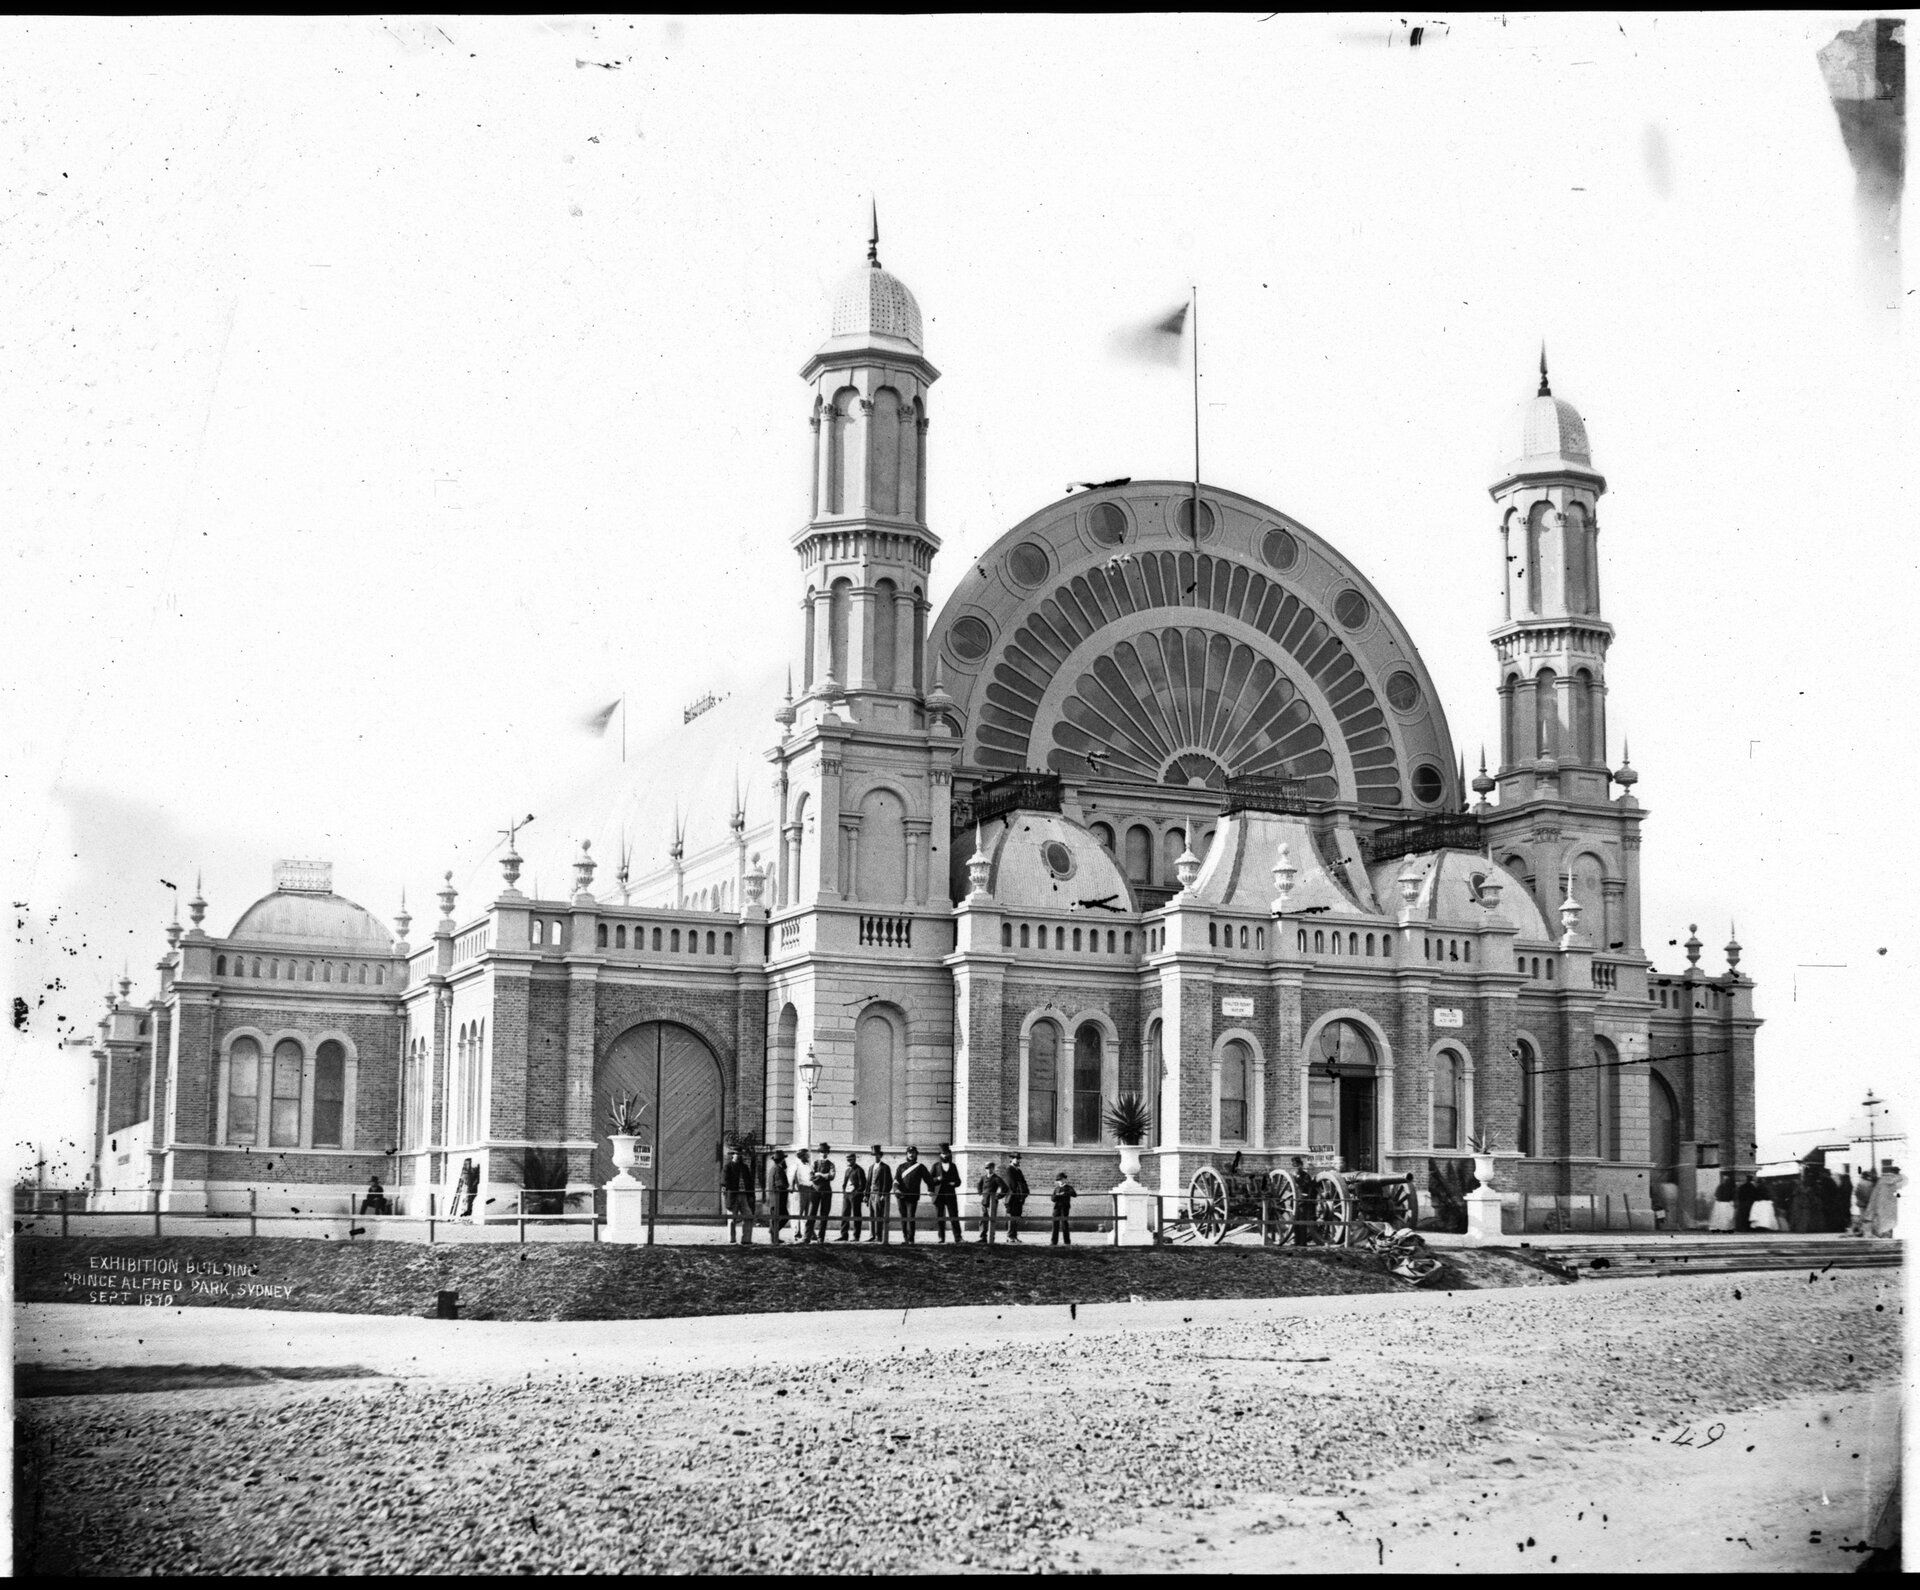 A domed exhibition building with two large towers on either side. A group of people and a horse and cart stand in front